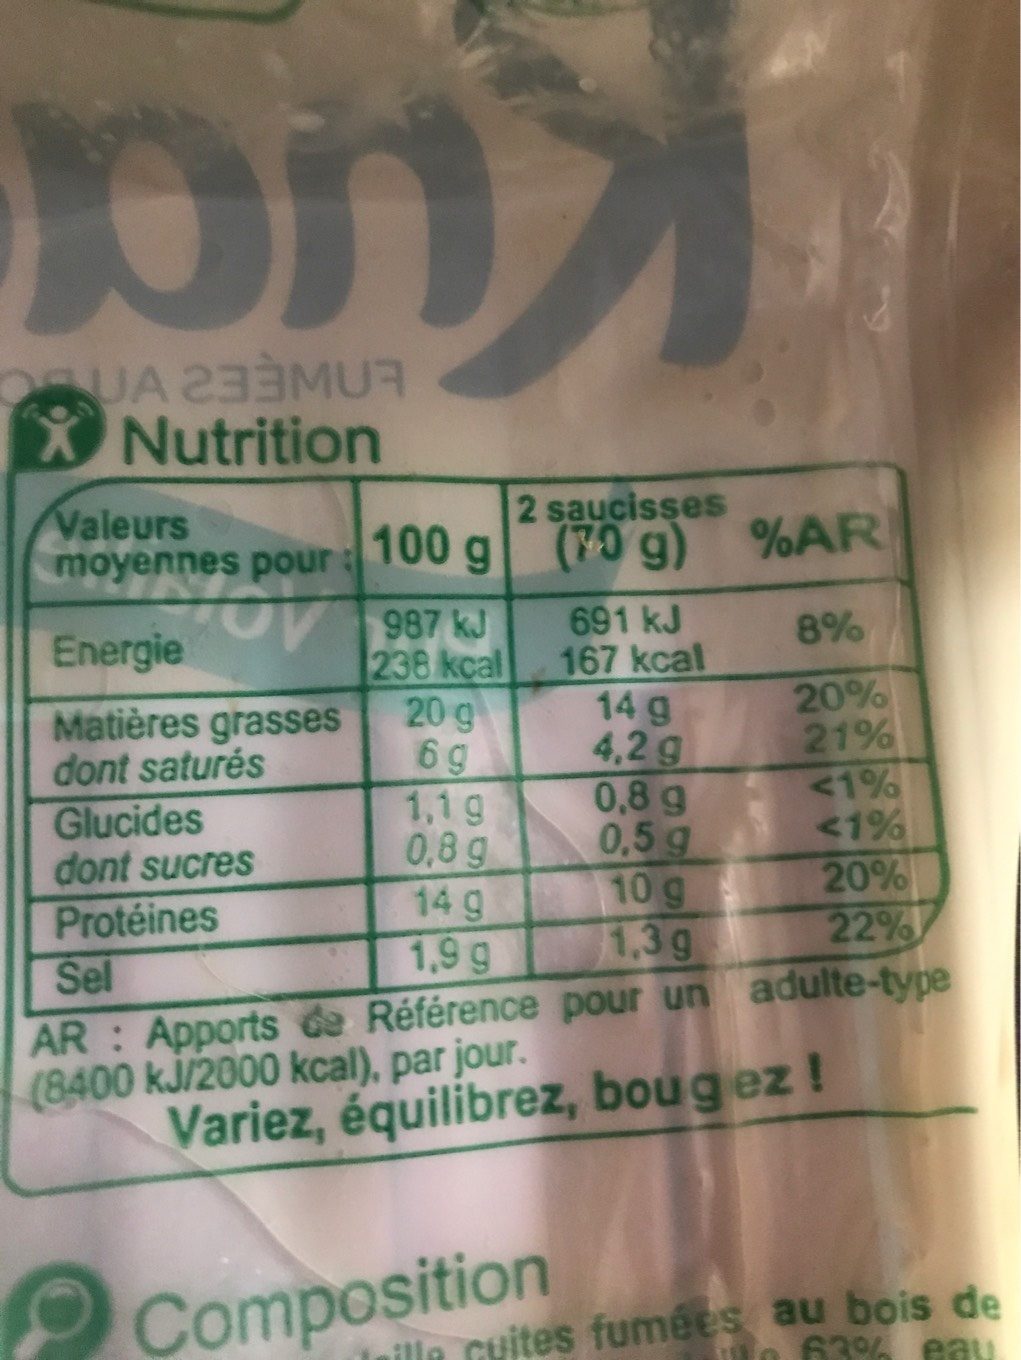 Knacks pur volaille - Nutrition facts - fr